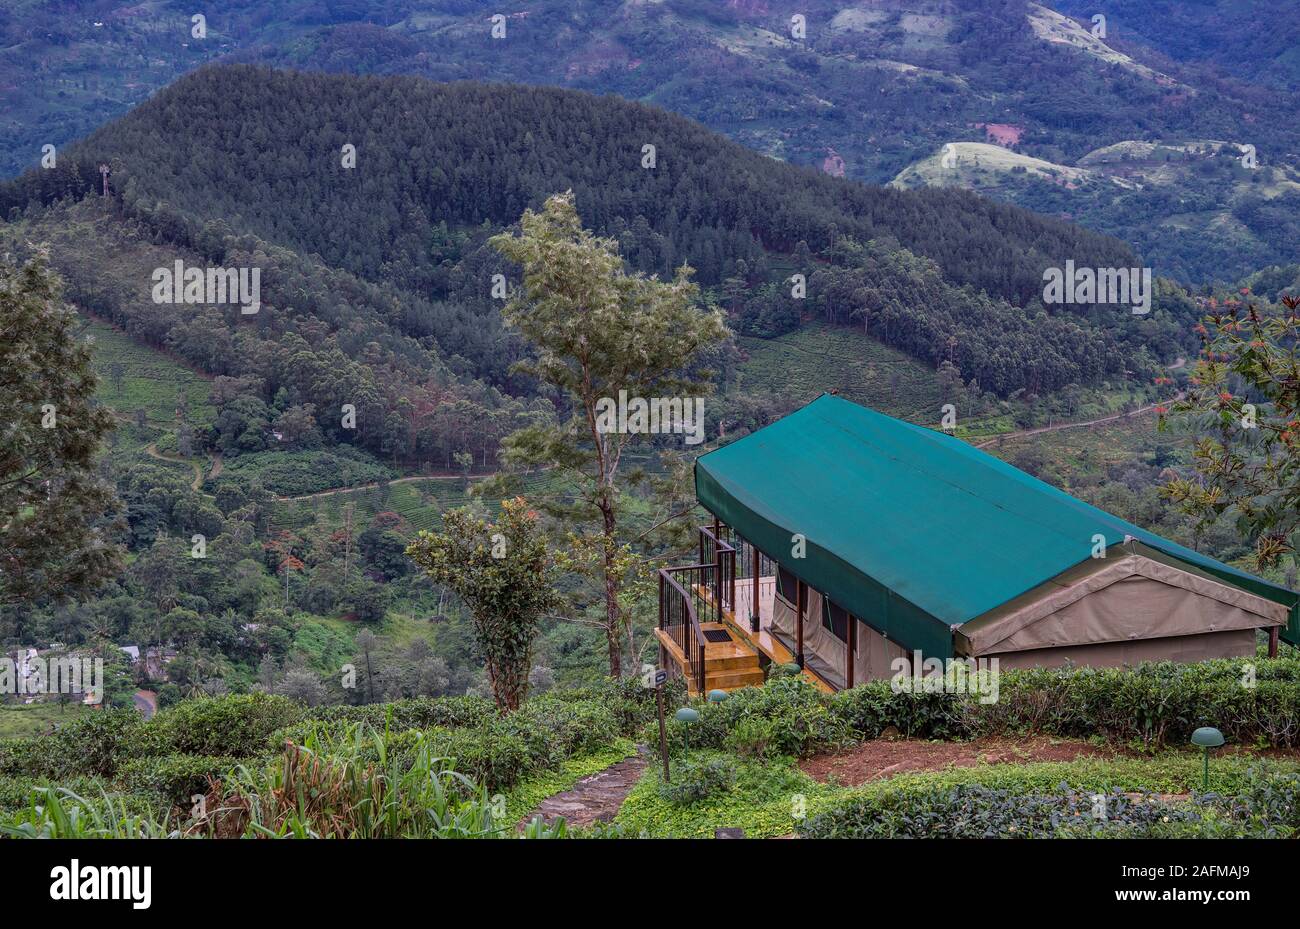 Luxury tent at a tea plantation in the central highlands of Sri Lanka Stock Photo